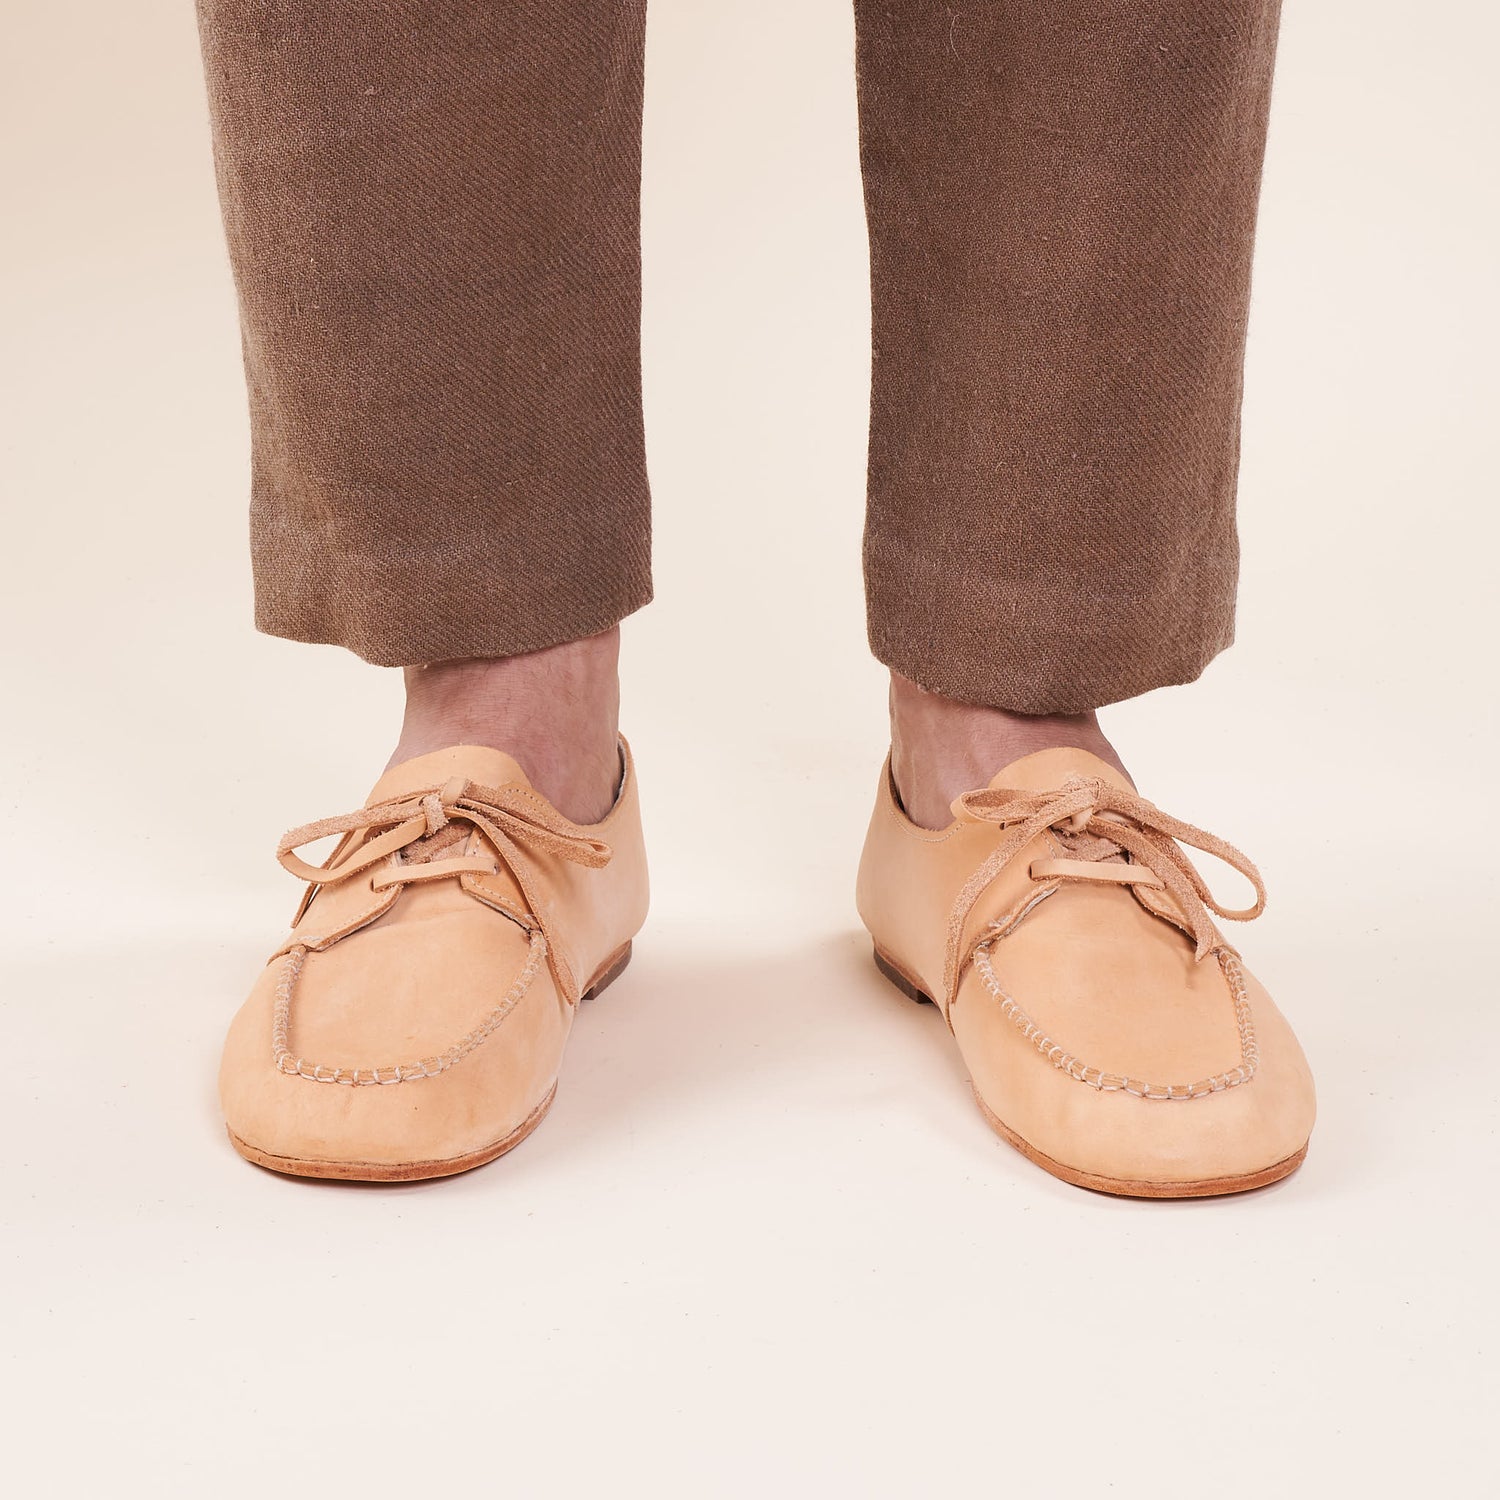 Moccasin, Vegetable Tanned Leather